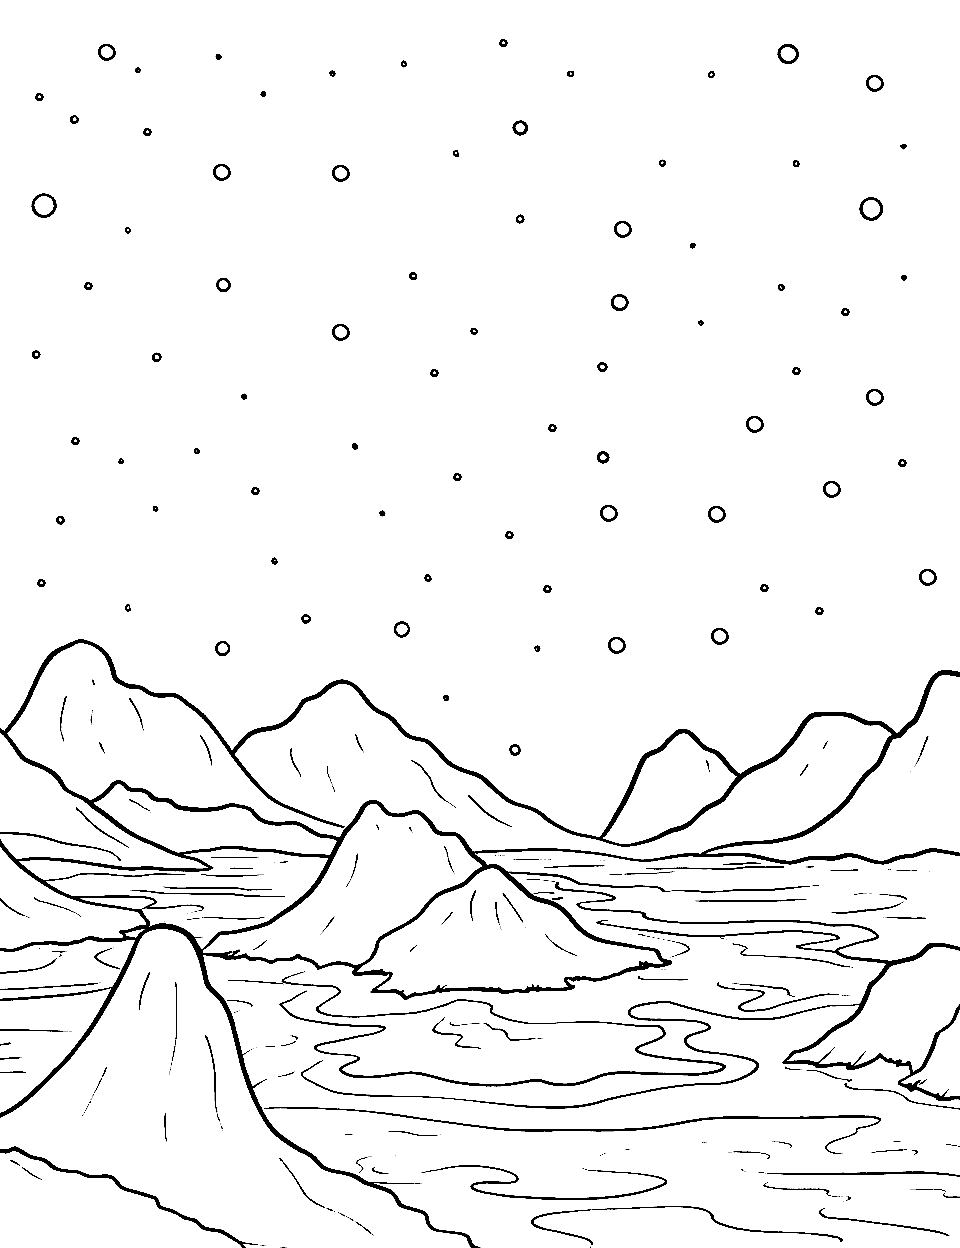 Mars's Mysterious Mountains Coloring Page - Rocky mountains and valleys on the surface of Mars.